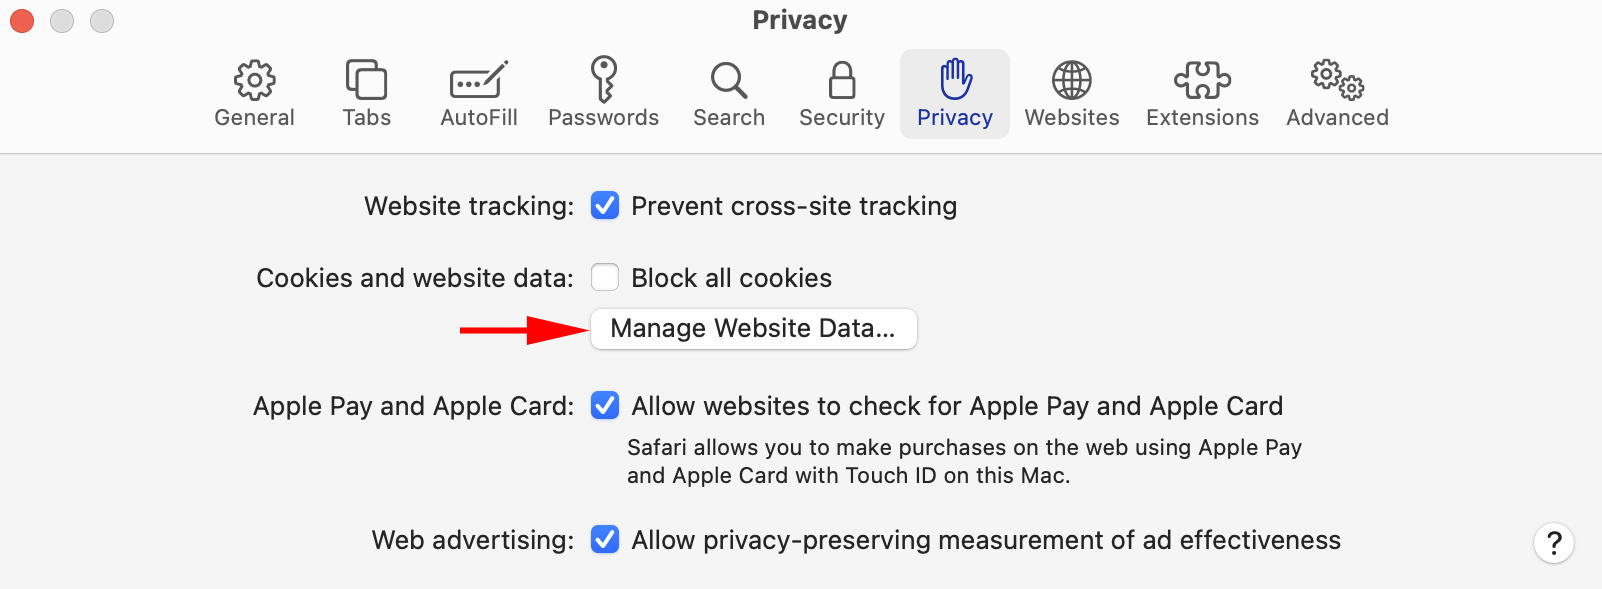 Choose Privacy and then Manage website data